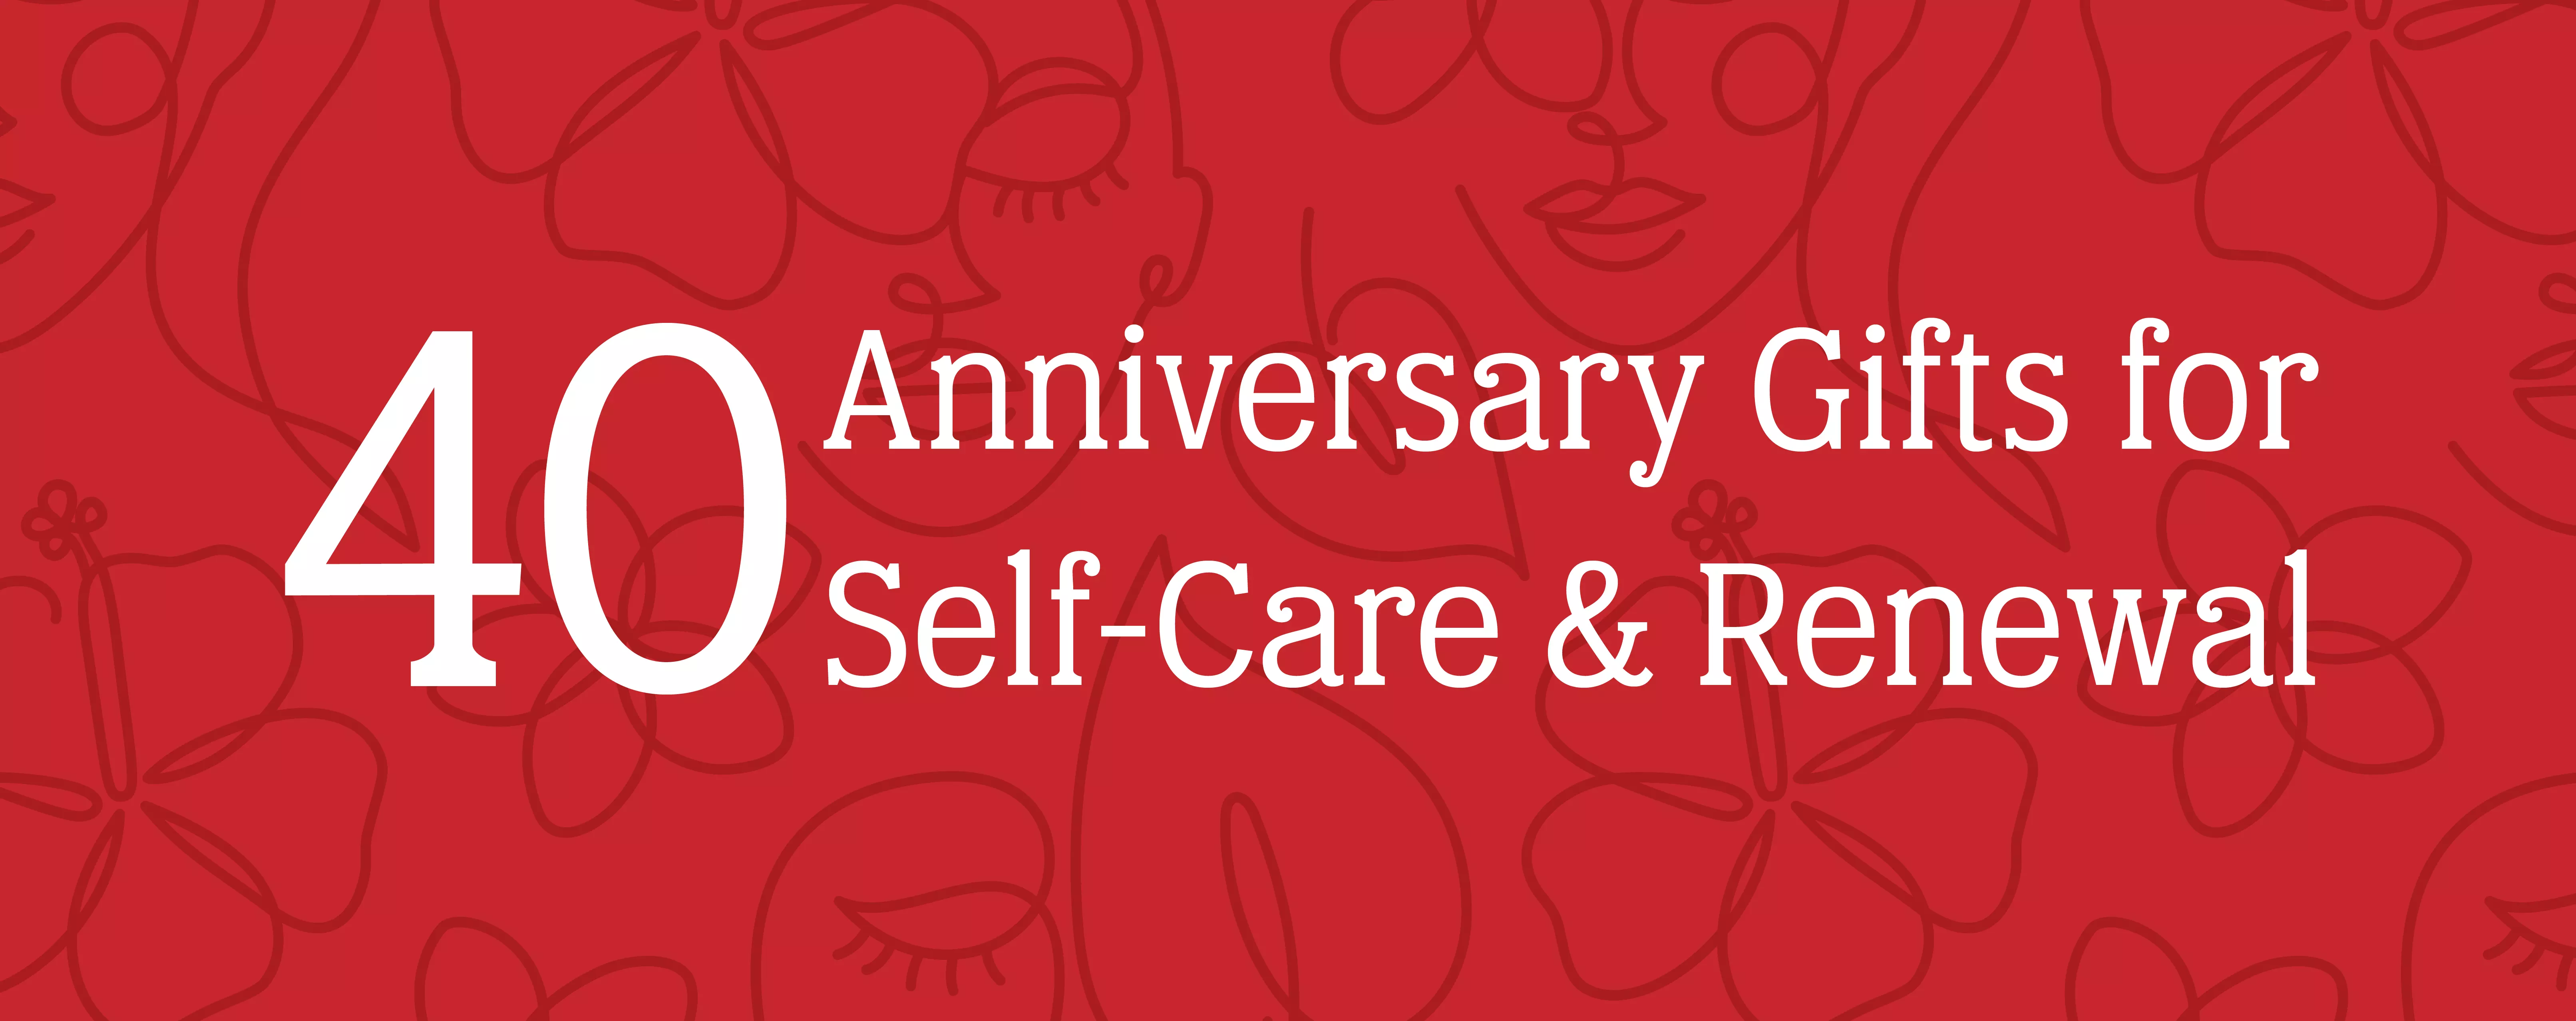 Faces and flowers line drawing pattern on a red background with a white text overlay that reads "40 Anniversary Gifts for Self-Care and Renewal"